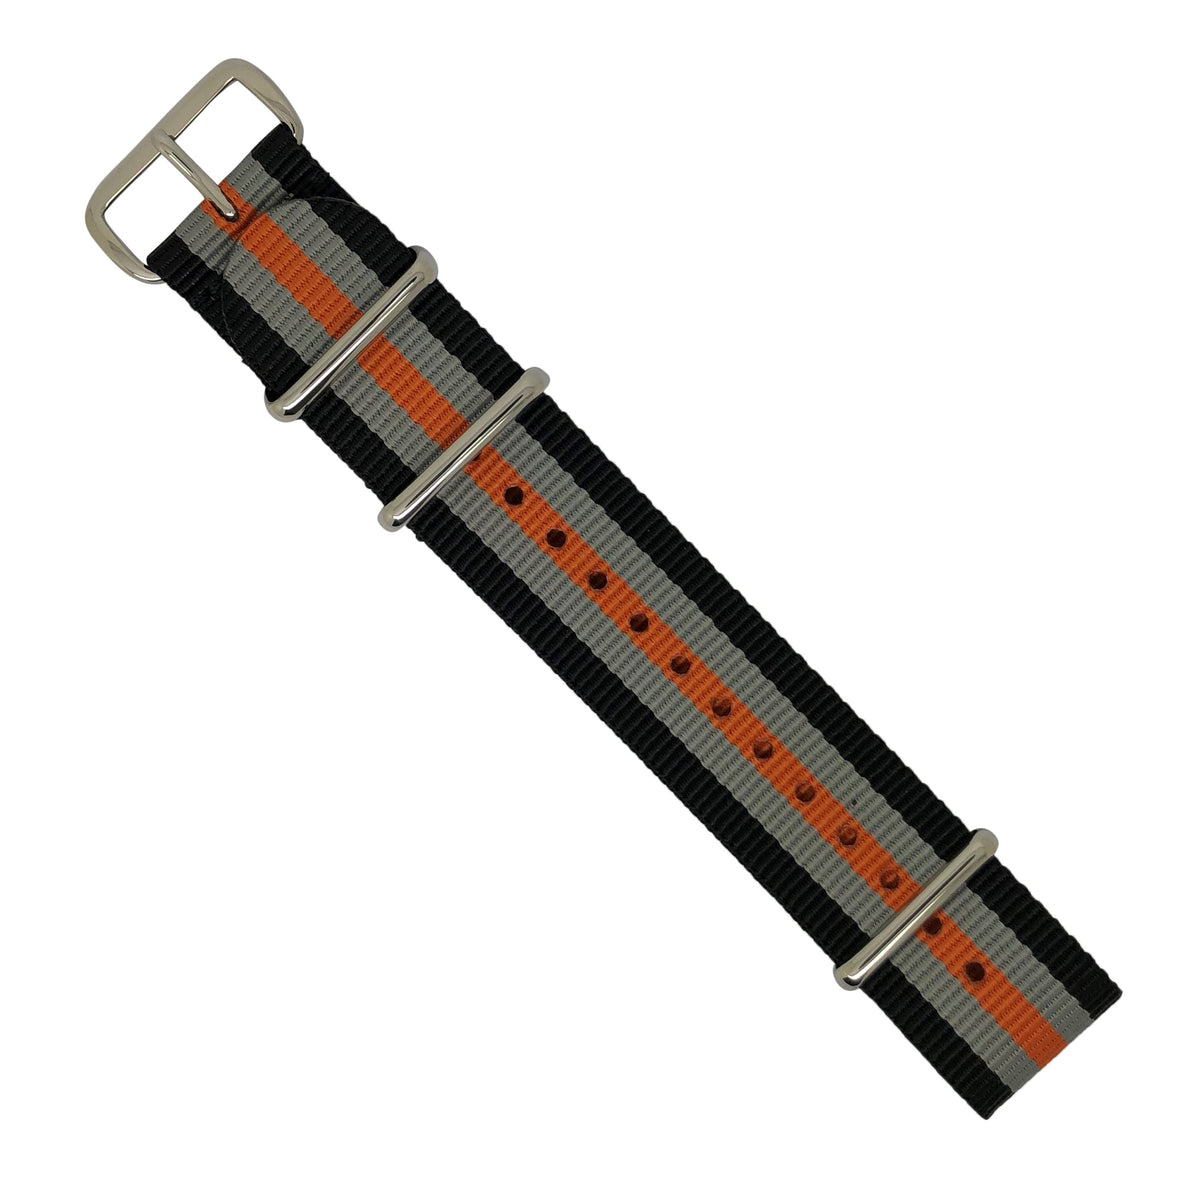 Premium Nato Strap in Black Grey Orange with Polished Silver Buckle (22mm) - Nomad watch Works